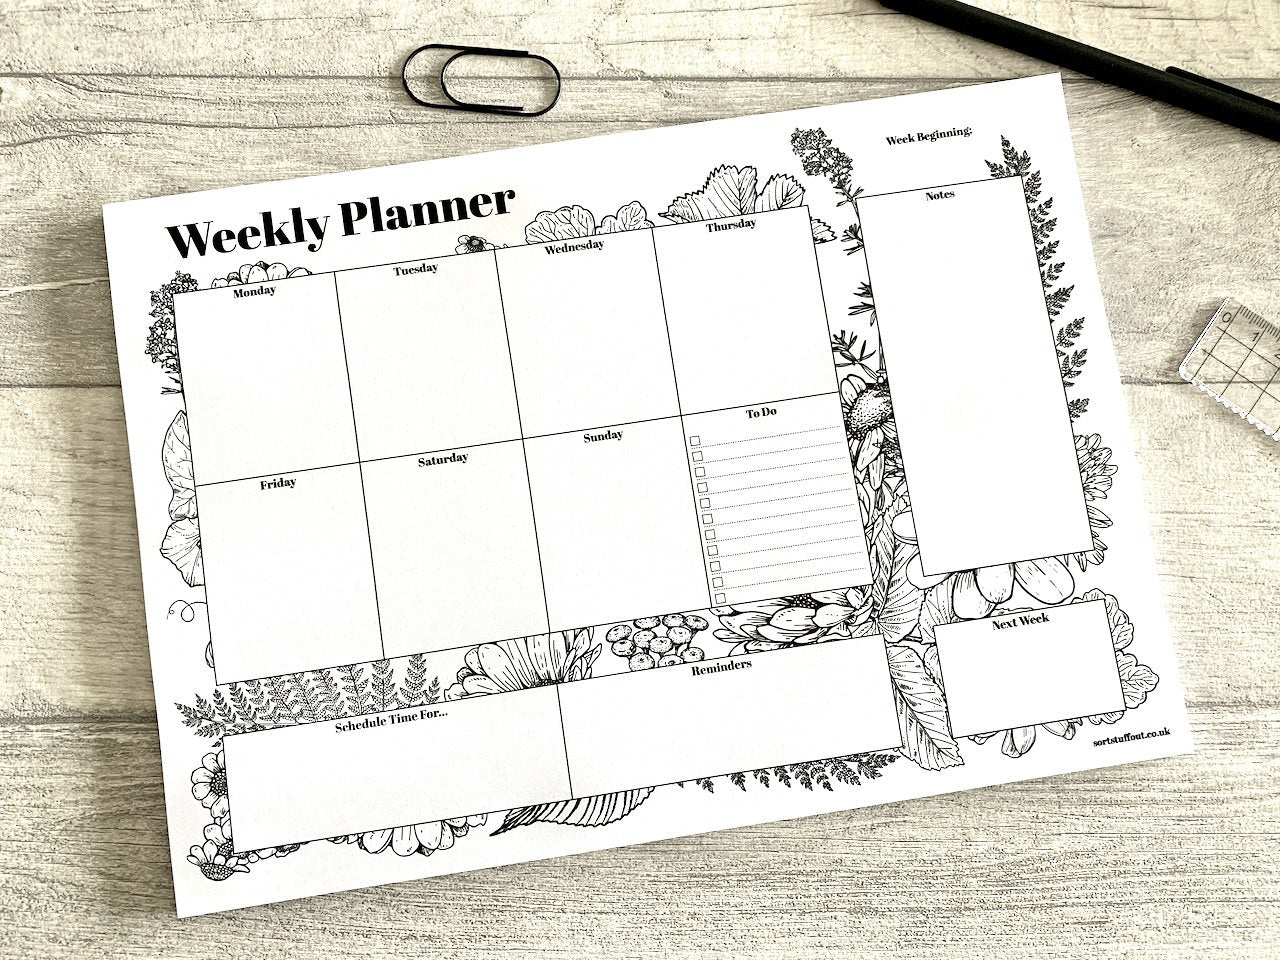 Weekly Planner Monochrome Floral Pad - A4 Tear Off Desk Pad